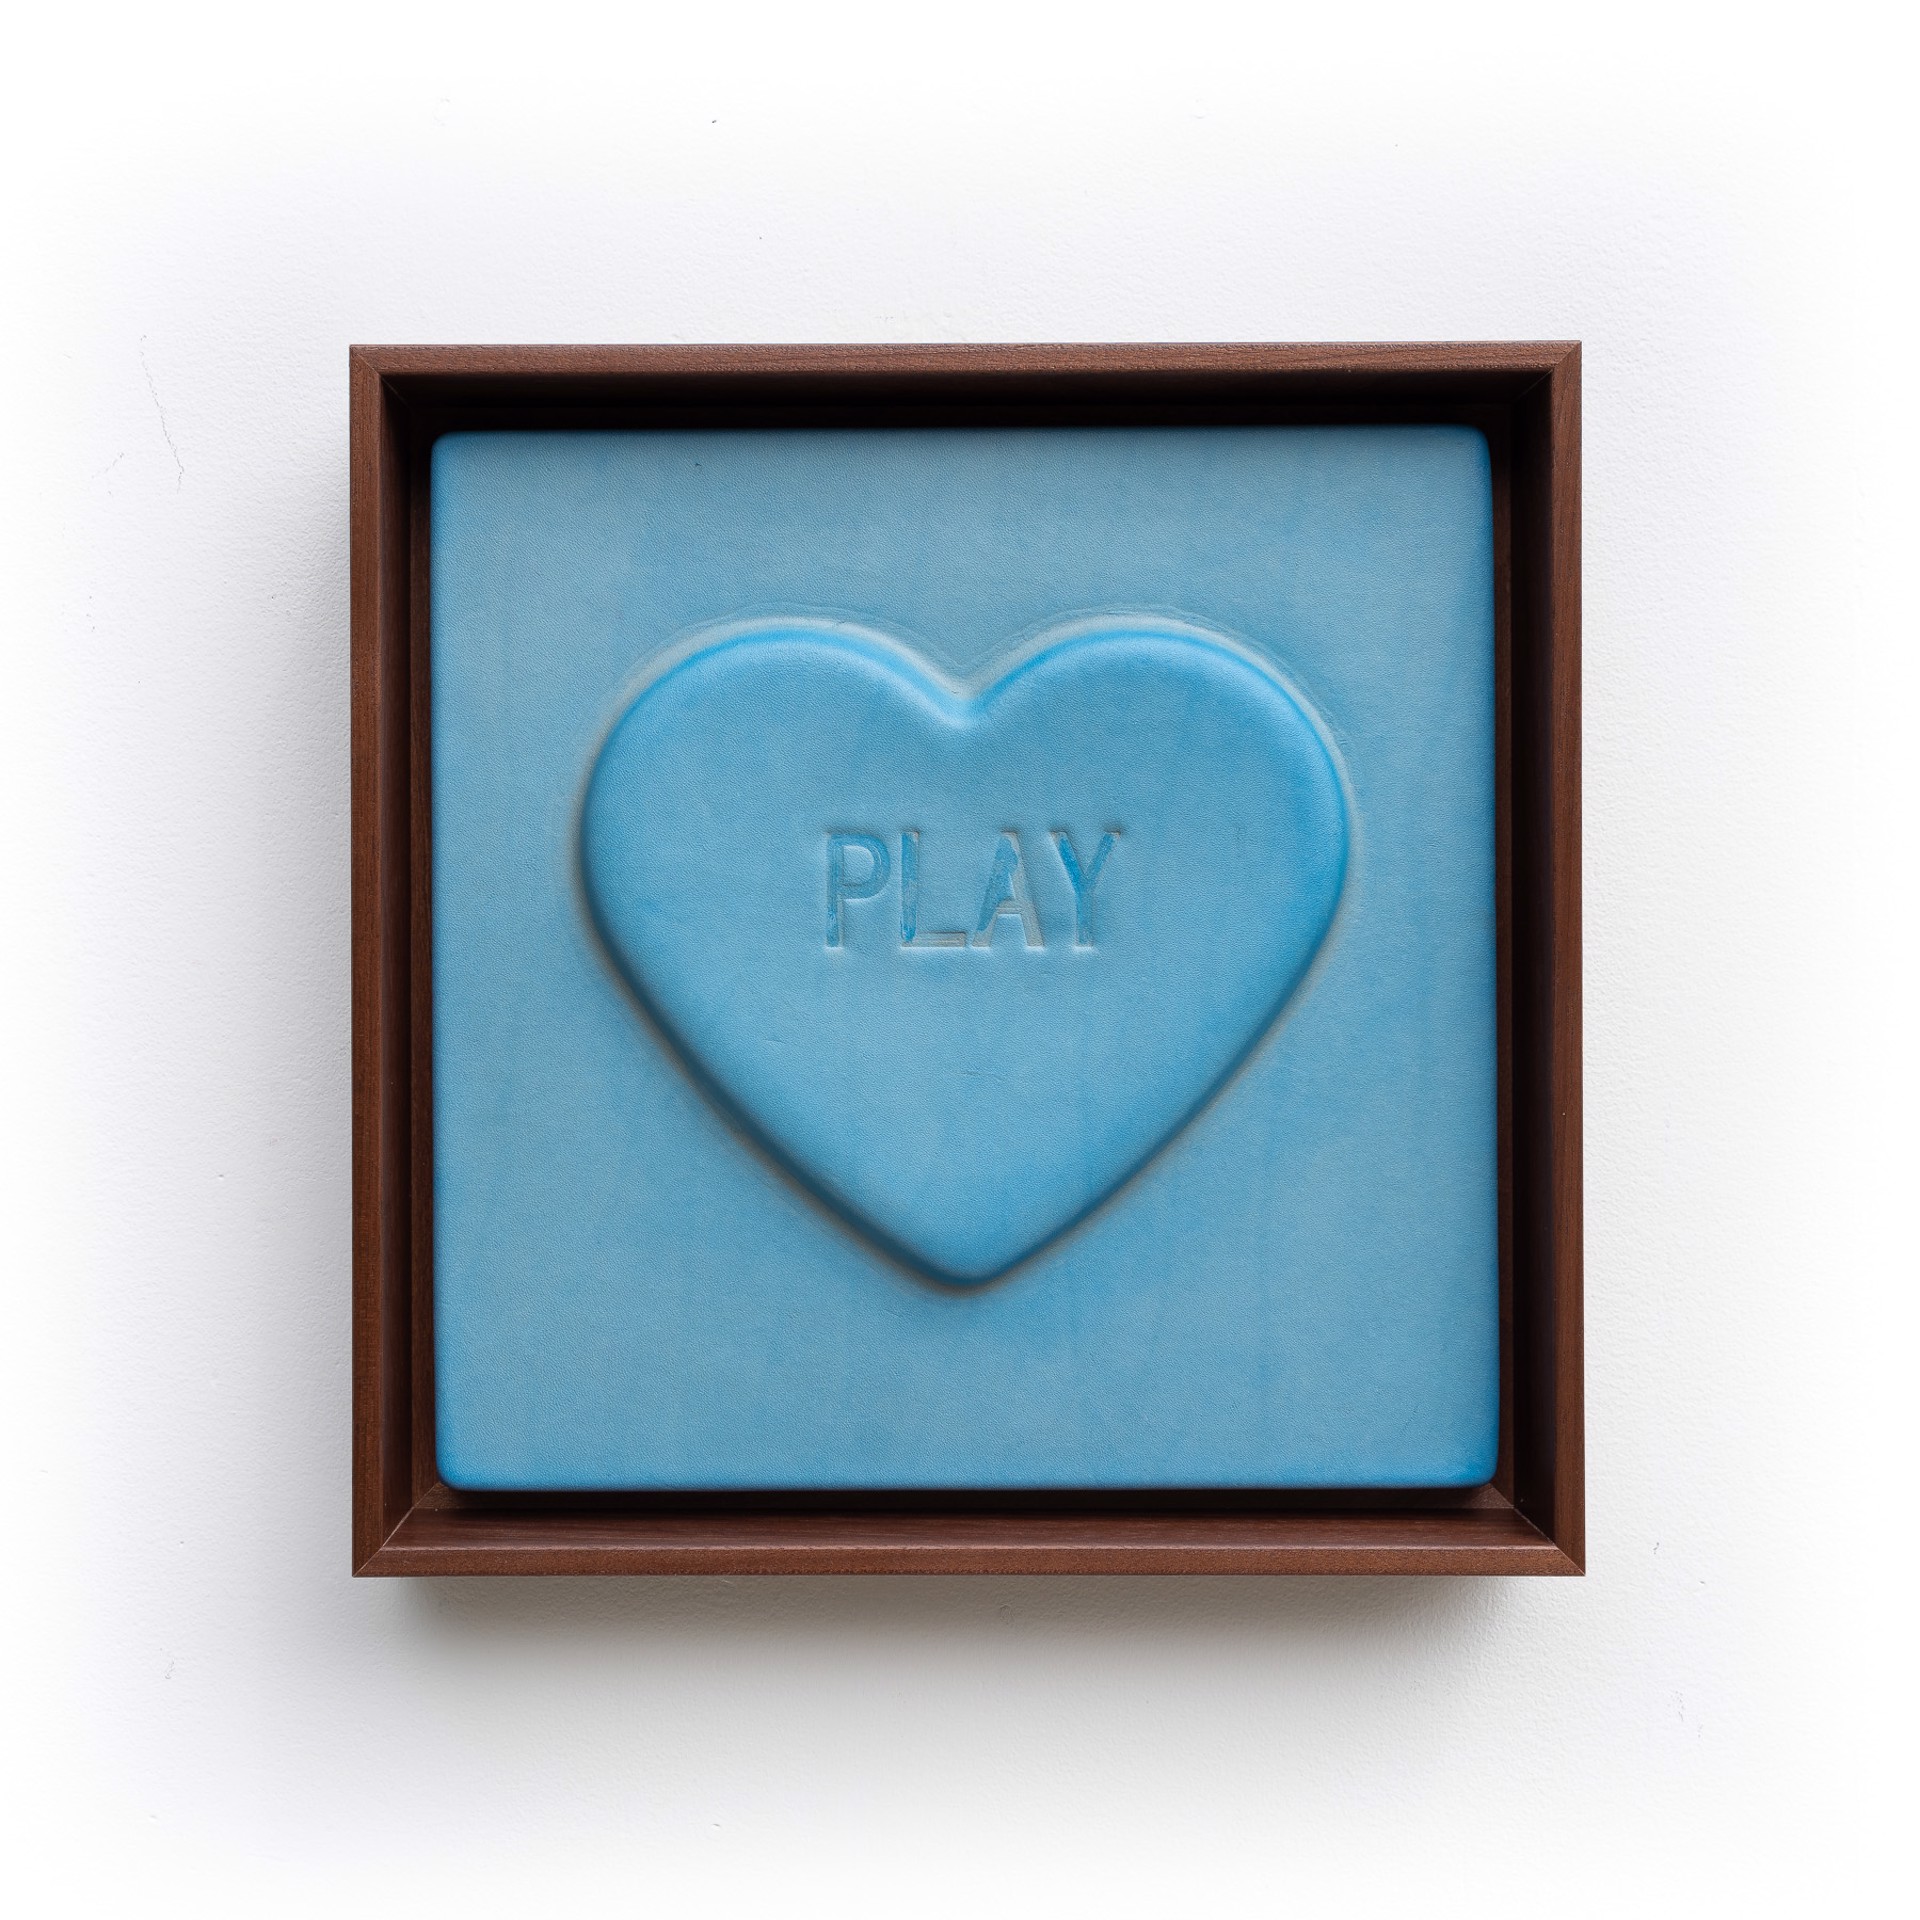 'PLAY' - Sweetheart series by Mx. Hyde